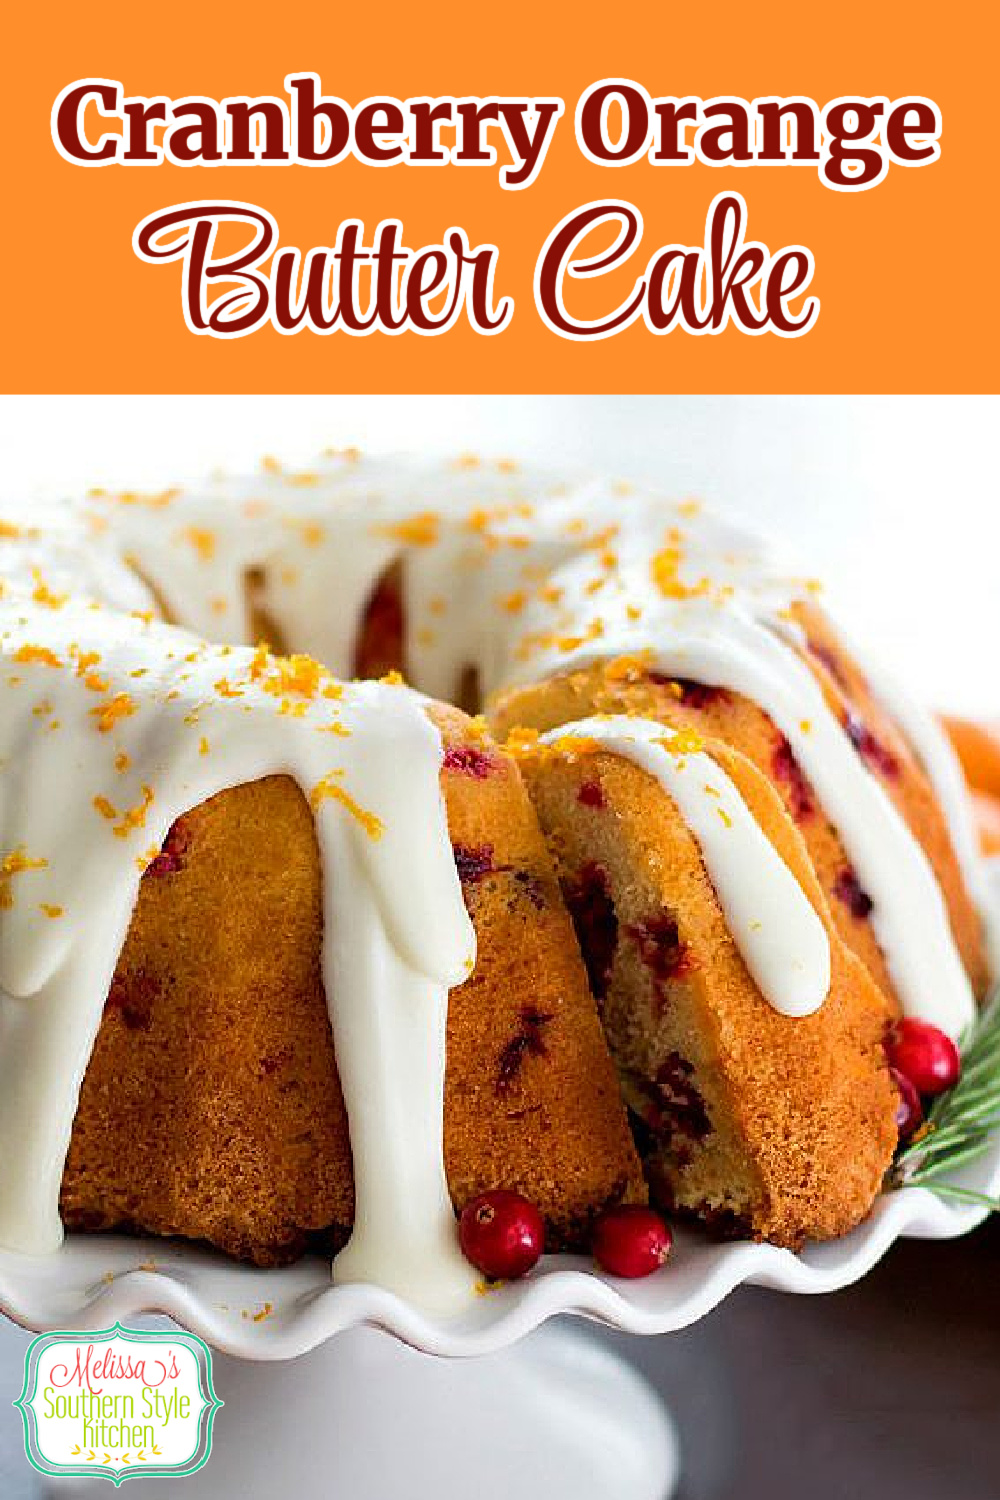 This stunning Cranberry Orange Butter Cake features holiday flavors in every bite #cranberryorangeecake #buttercake #christmascranberrycake #orange #cakes #cakerecipes #holidaycakes #desserts #dessertfoodrecipes #Christmasdesserts #southernfood #southernrecipes